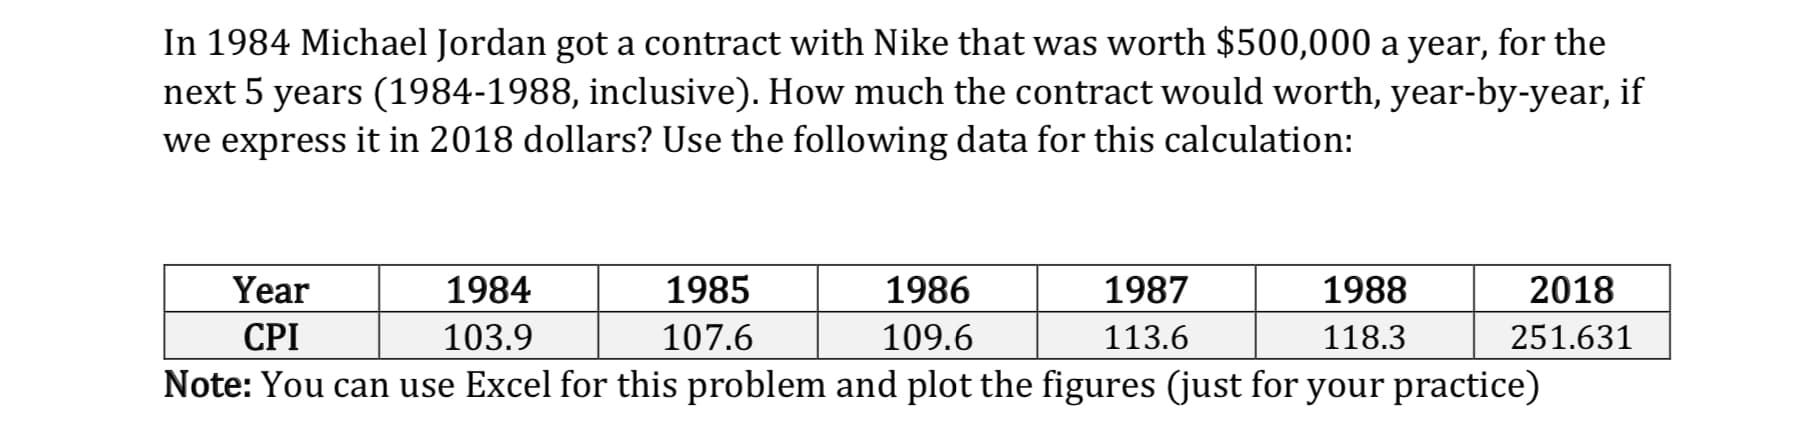 In 1984 Michael Jordan got a contract with Nike that was worth $500,000 a year, for the
next 5 years (1984-1988, inclusive). How much the contract would worth, year-by-year, if
we express it in 2018 dollars? Use the following data for this calculation:
Year
1984
1985
1986
1987
1988
2018
CPI
103.9
107.6
109.6
113.6
118.3
251.631
